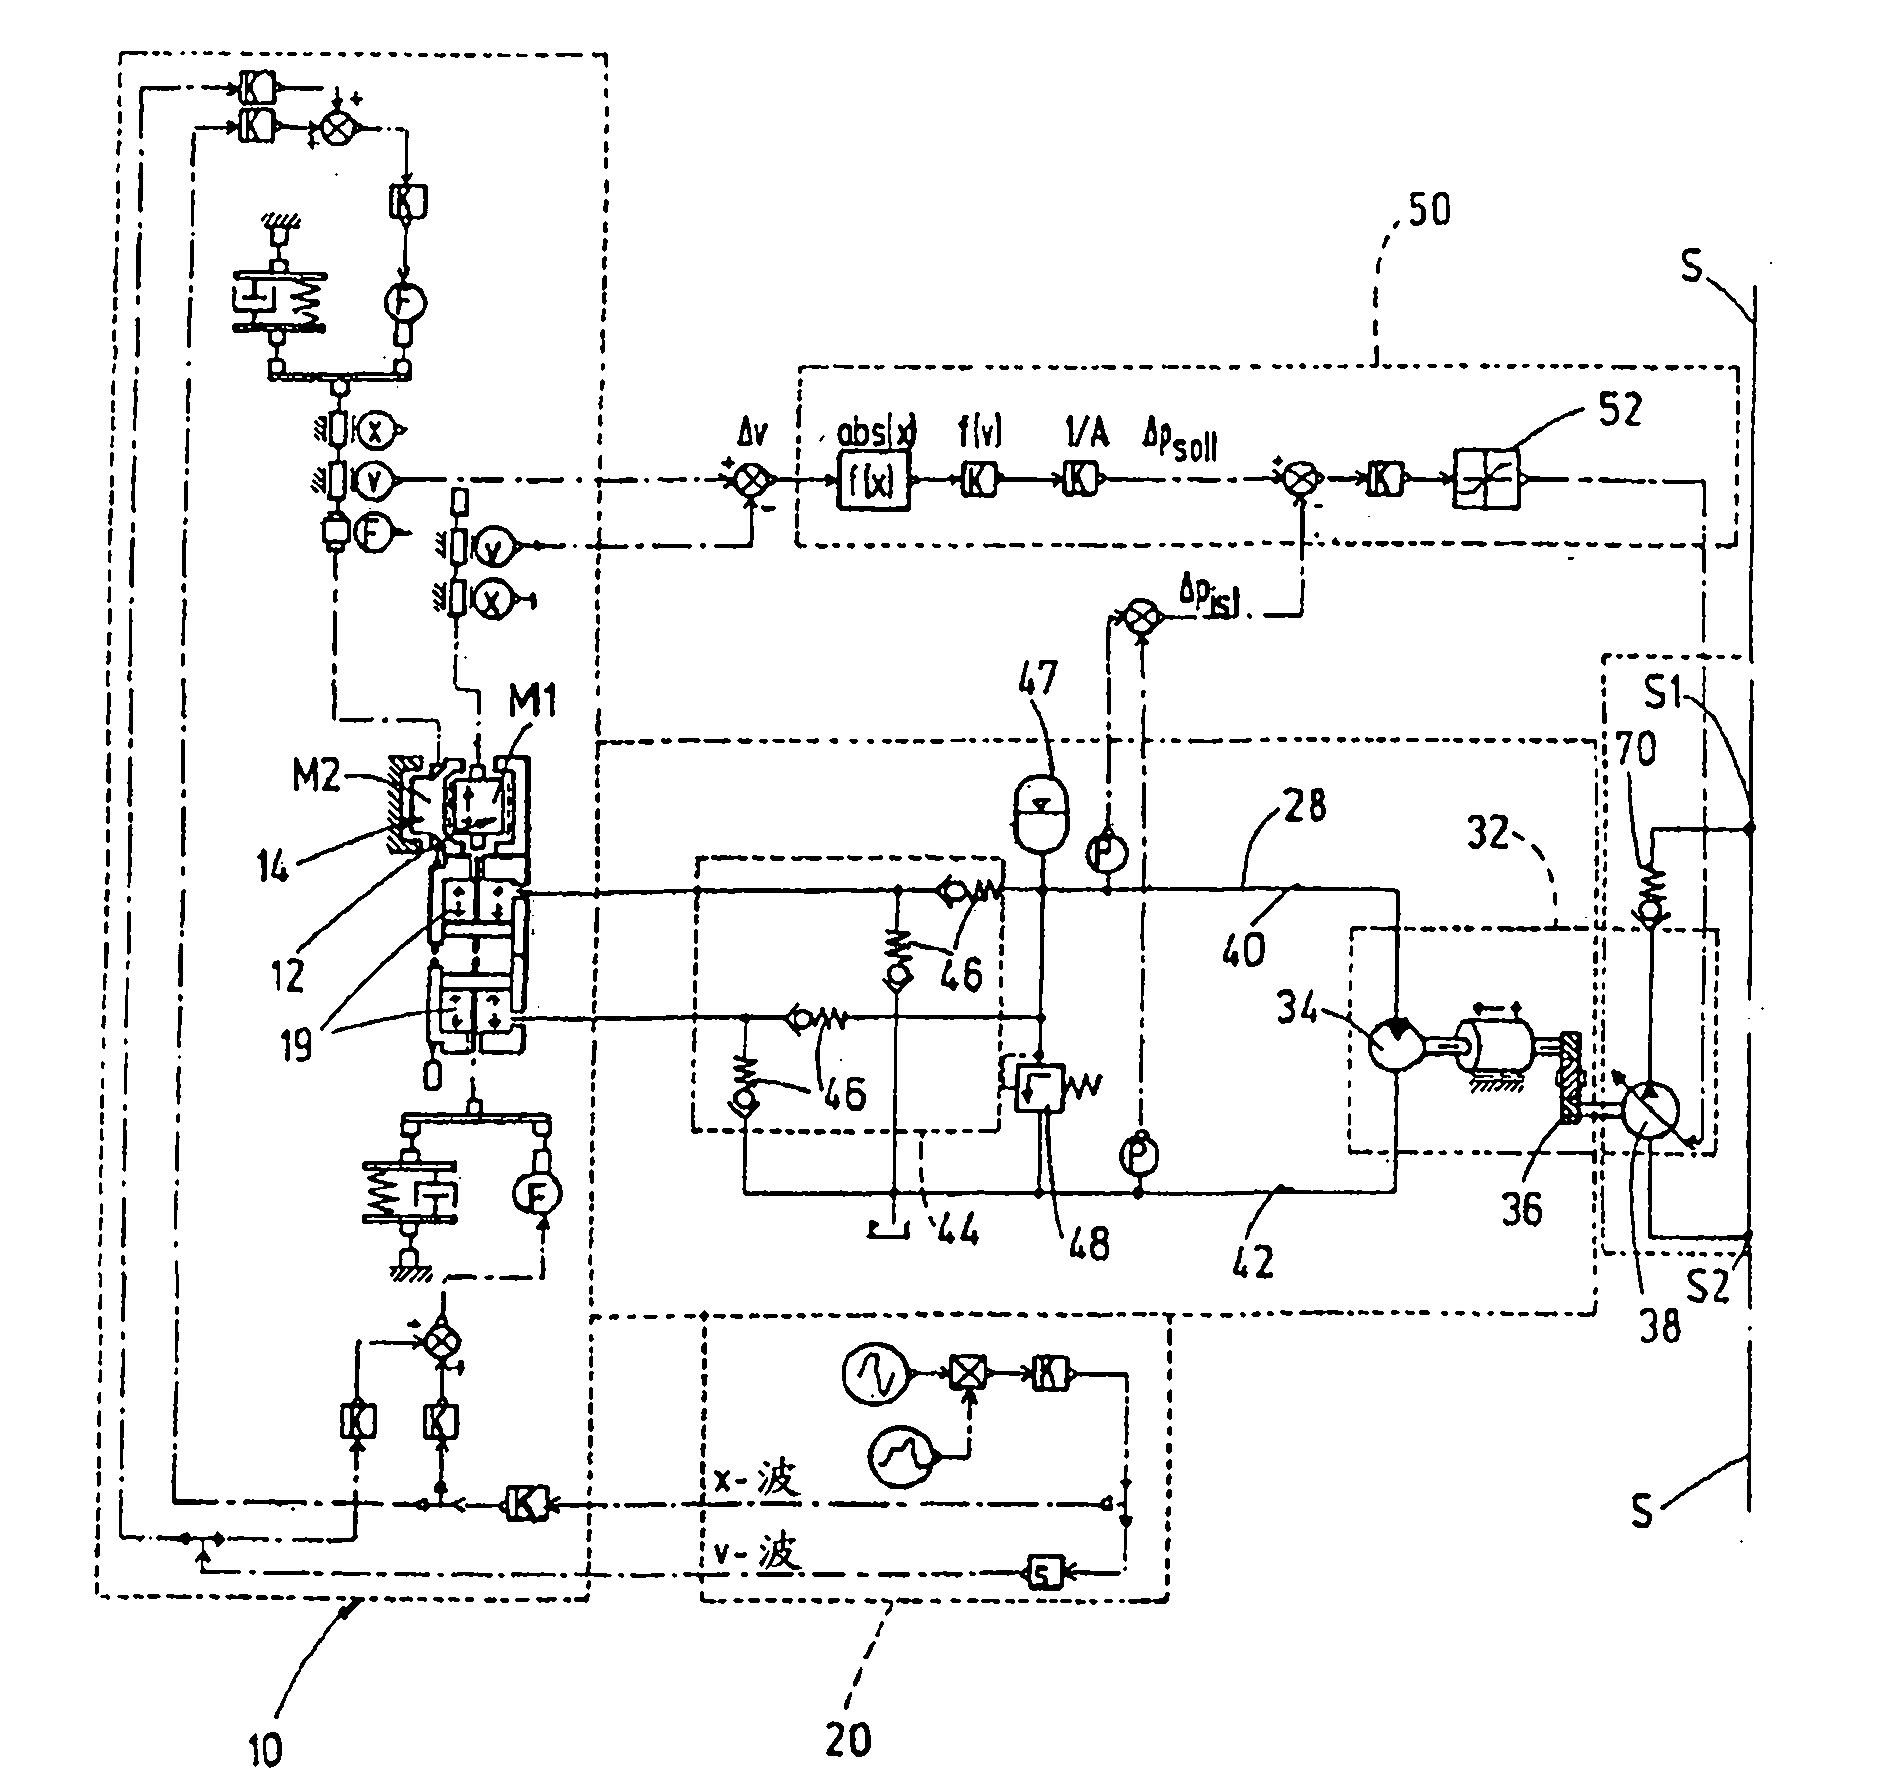 Energy converting device for converting wave energy into electric energy